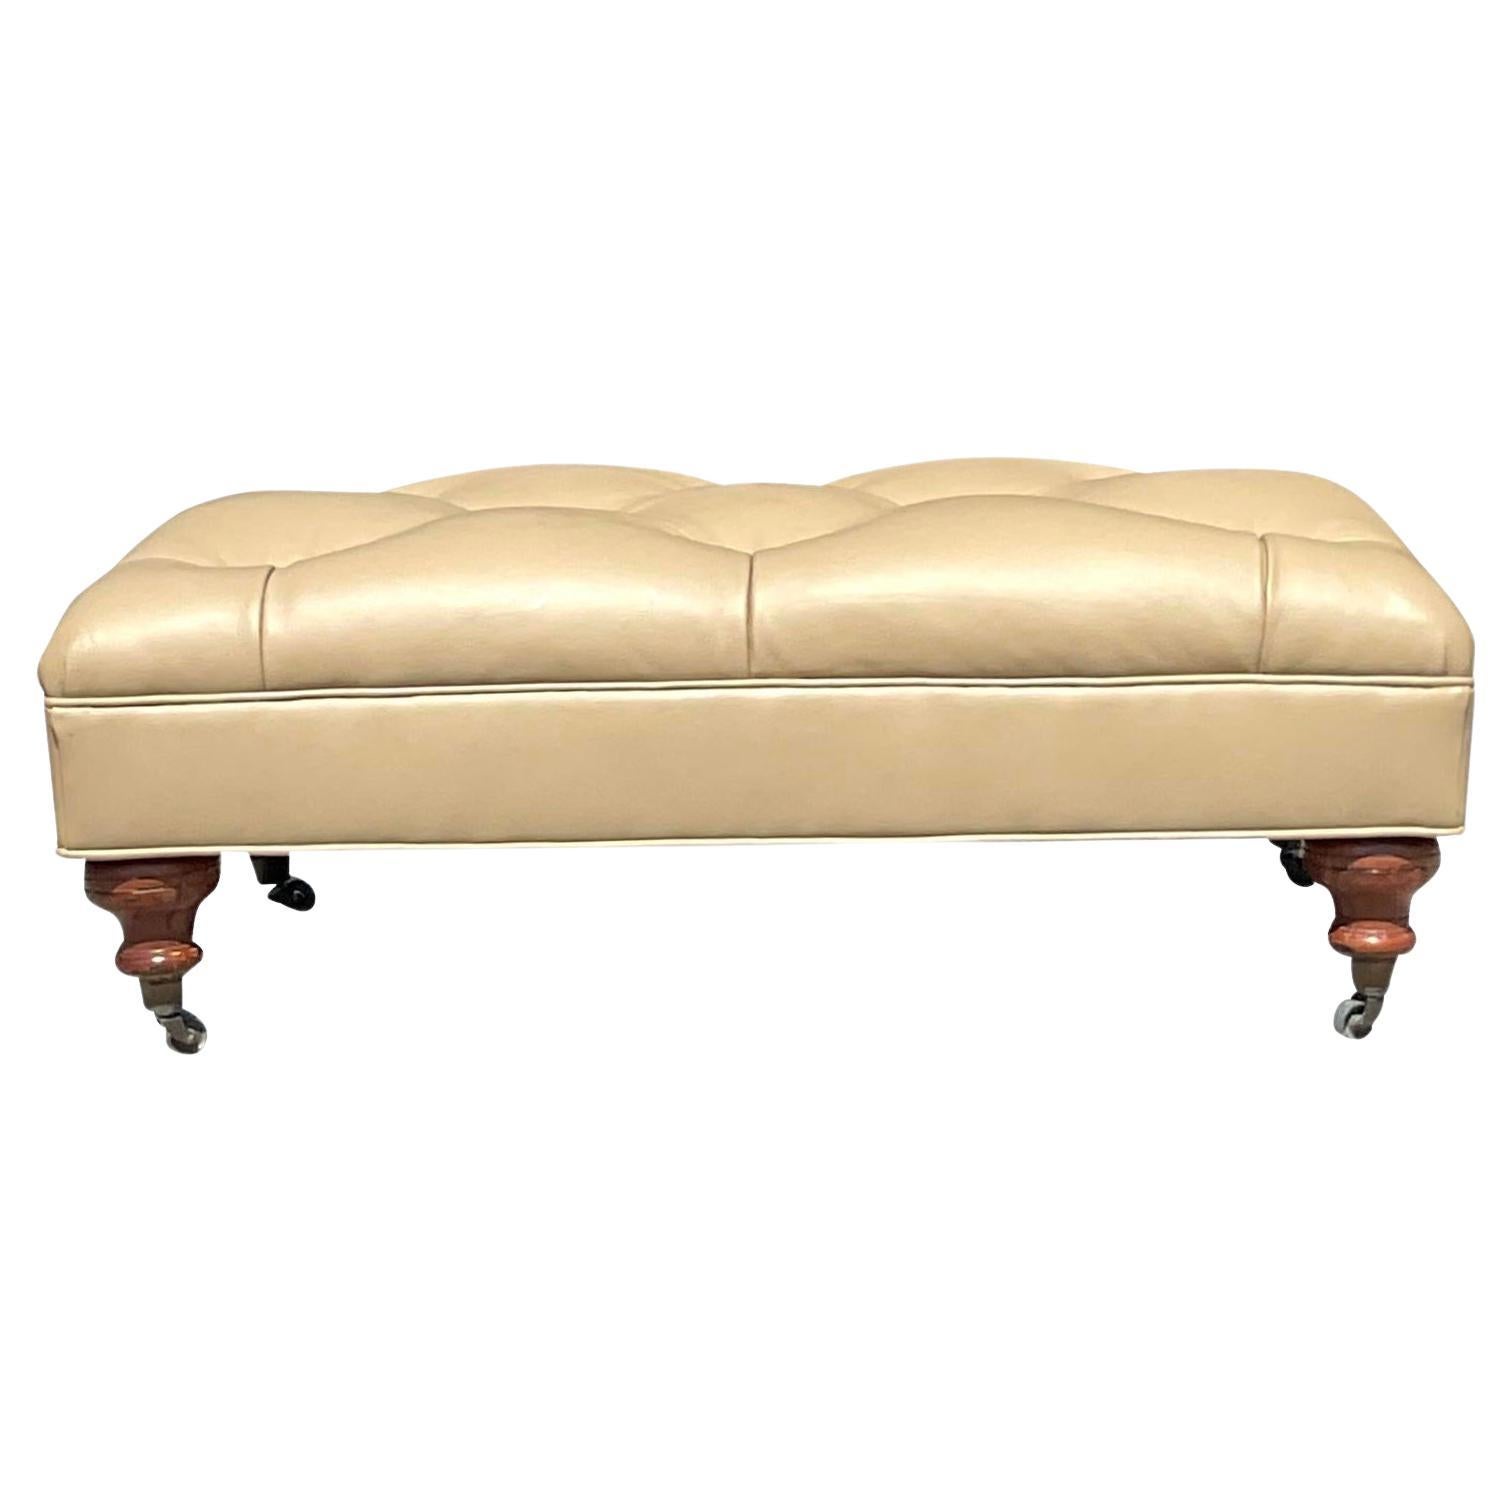 Vintage Tufted Leather Ottoman For Sale